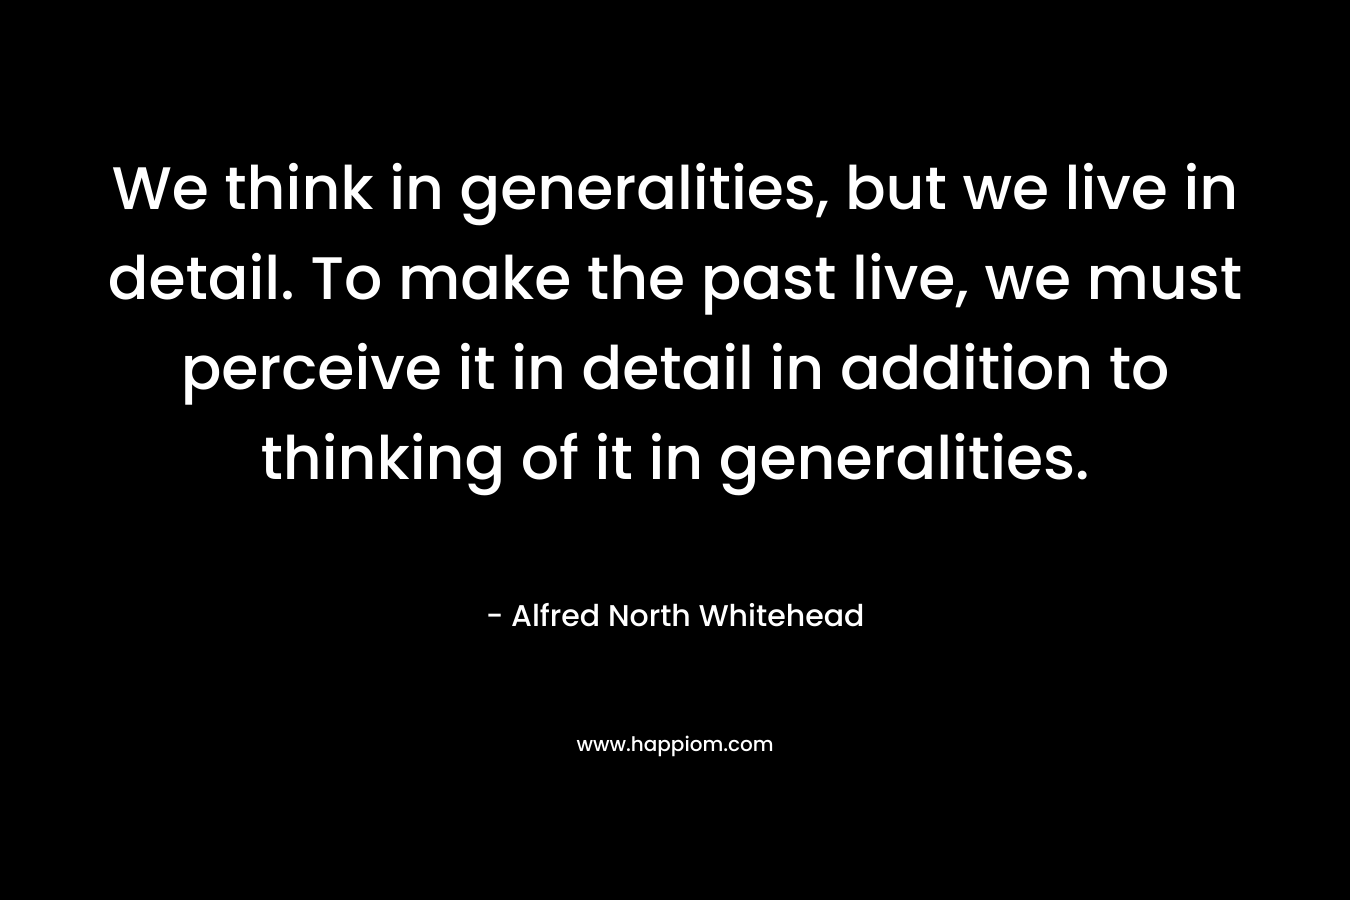 We think in generalities, but we live in detail. To make the past live, we must perceive it in detail in addition to thinking of it in generalities.